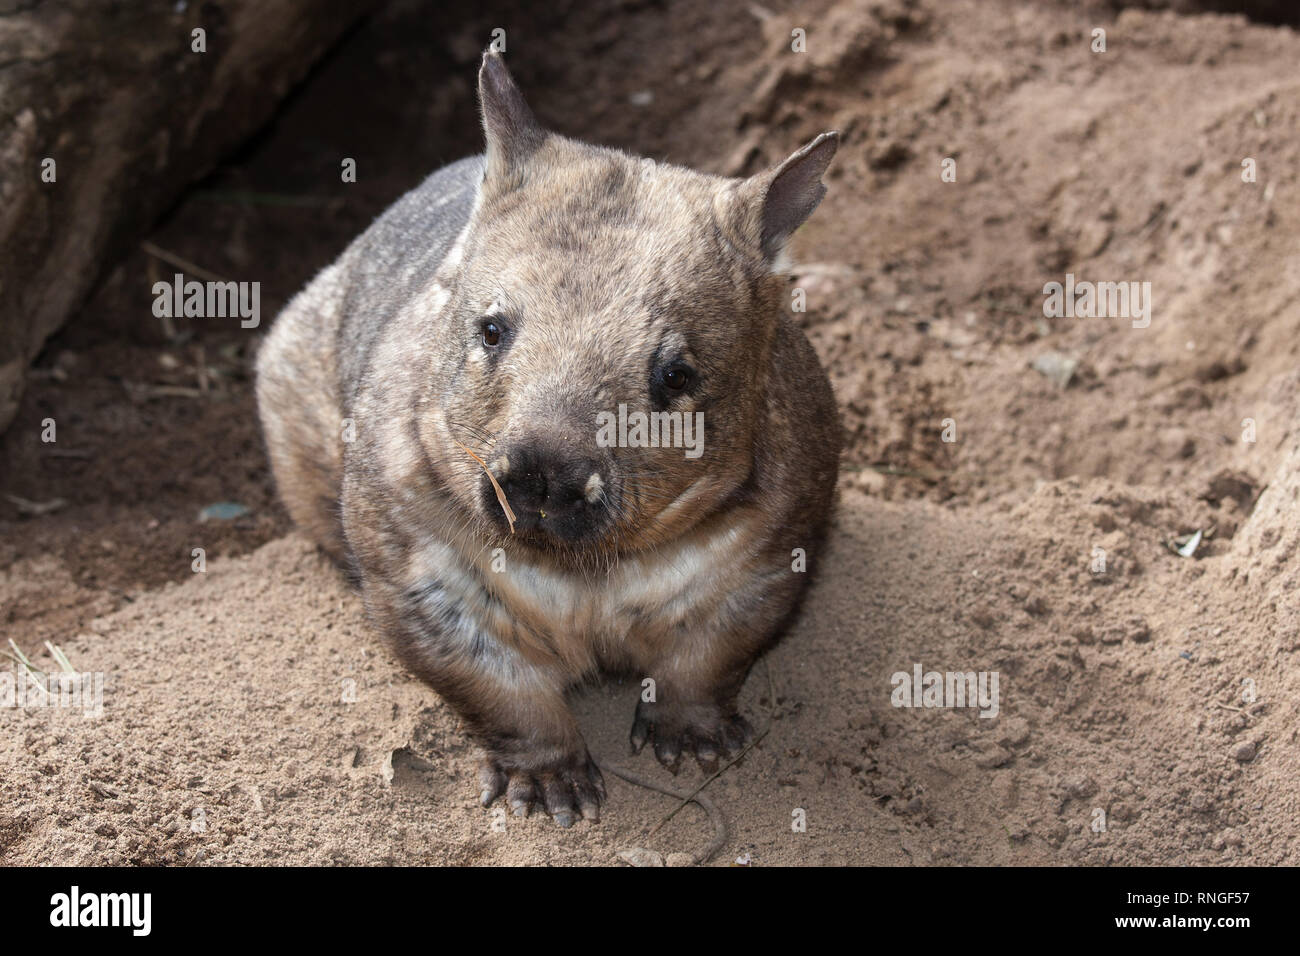 Southern hairy-nosed wombat Stock Photo